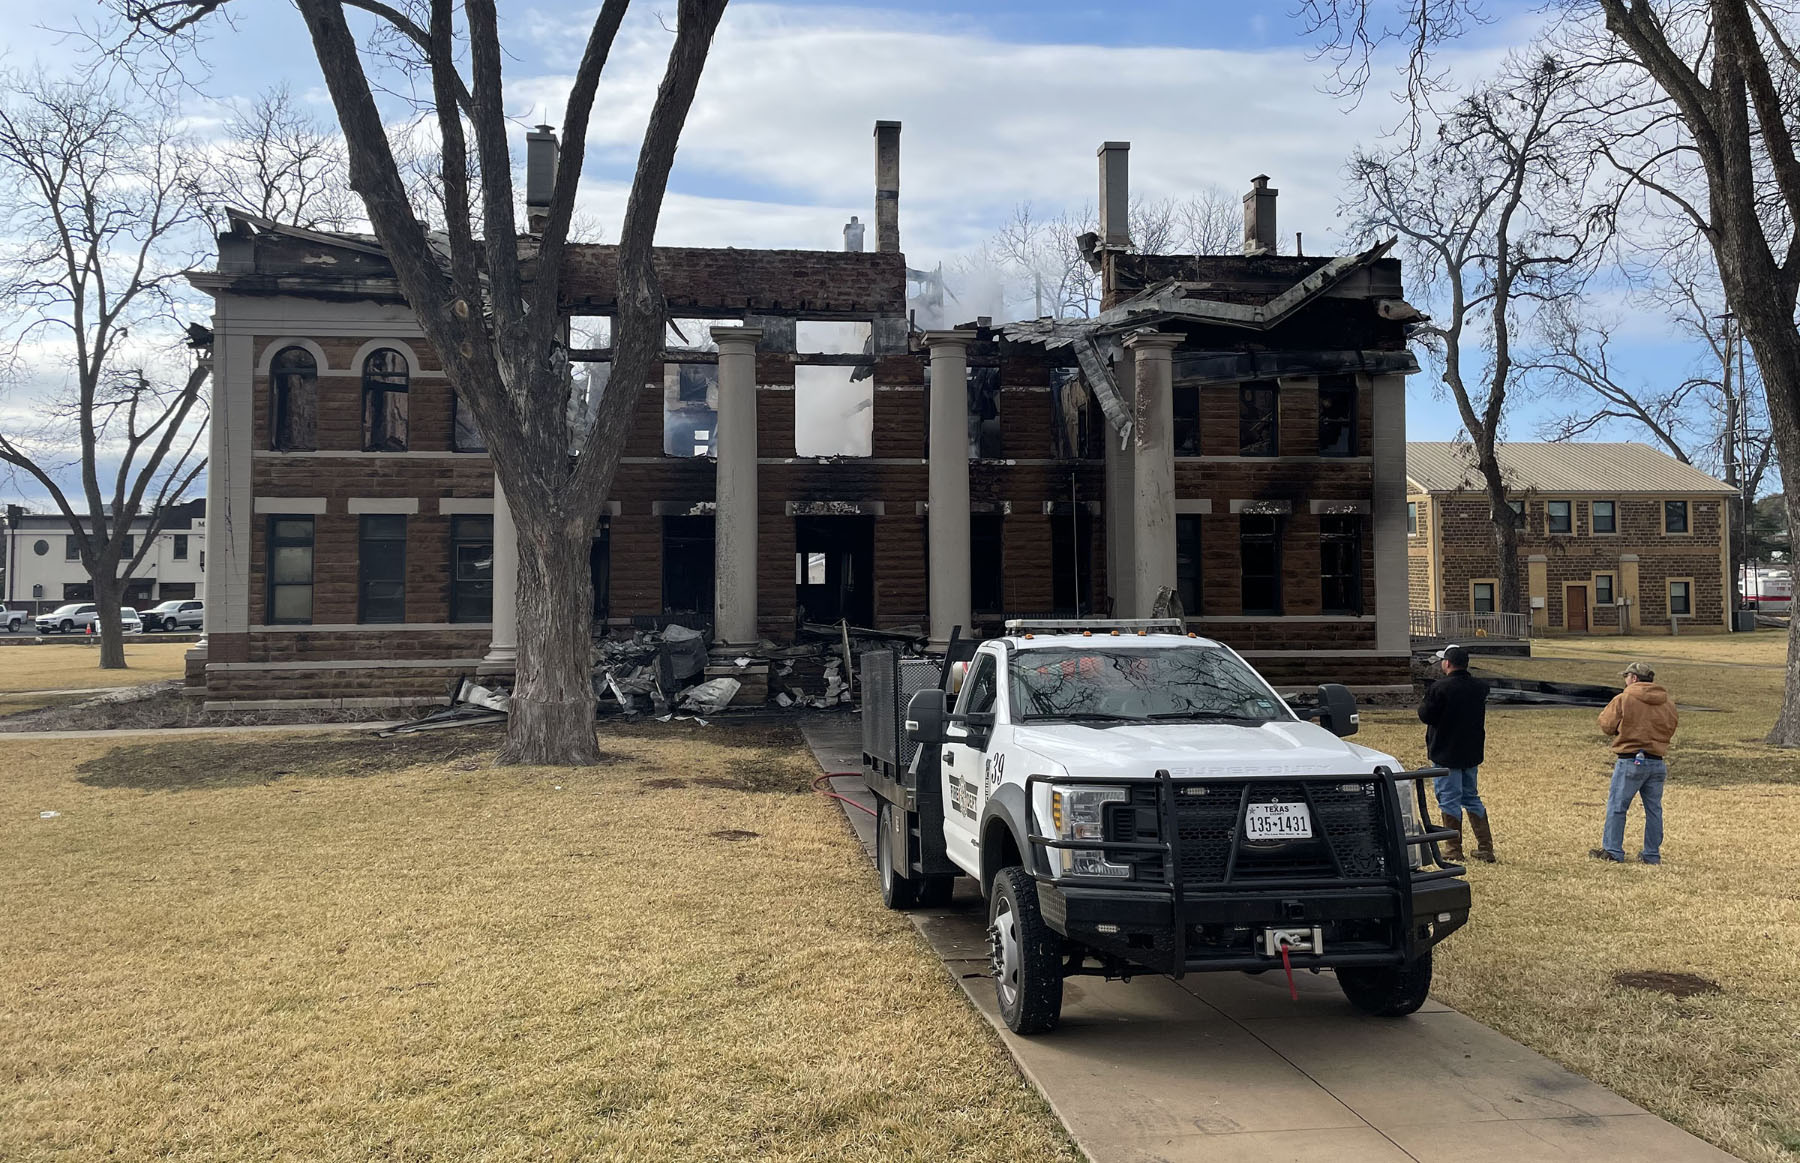 A white fire department truck parked out front of the burned remains of the Mason County Courthouse